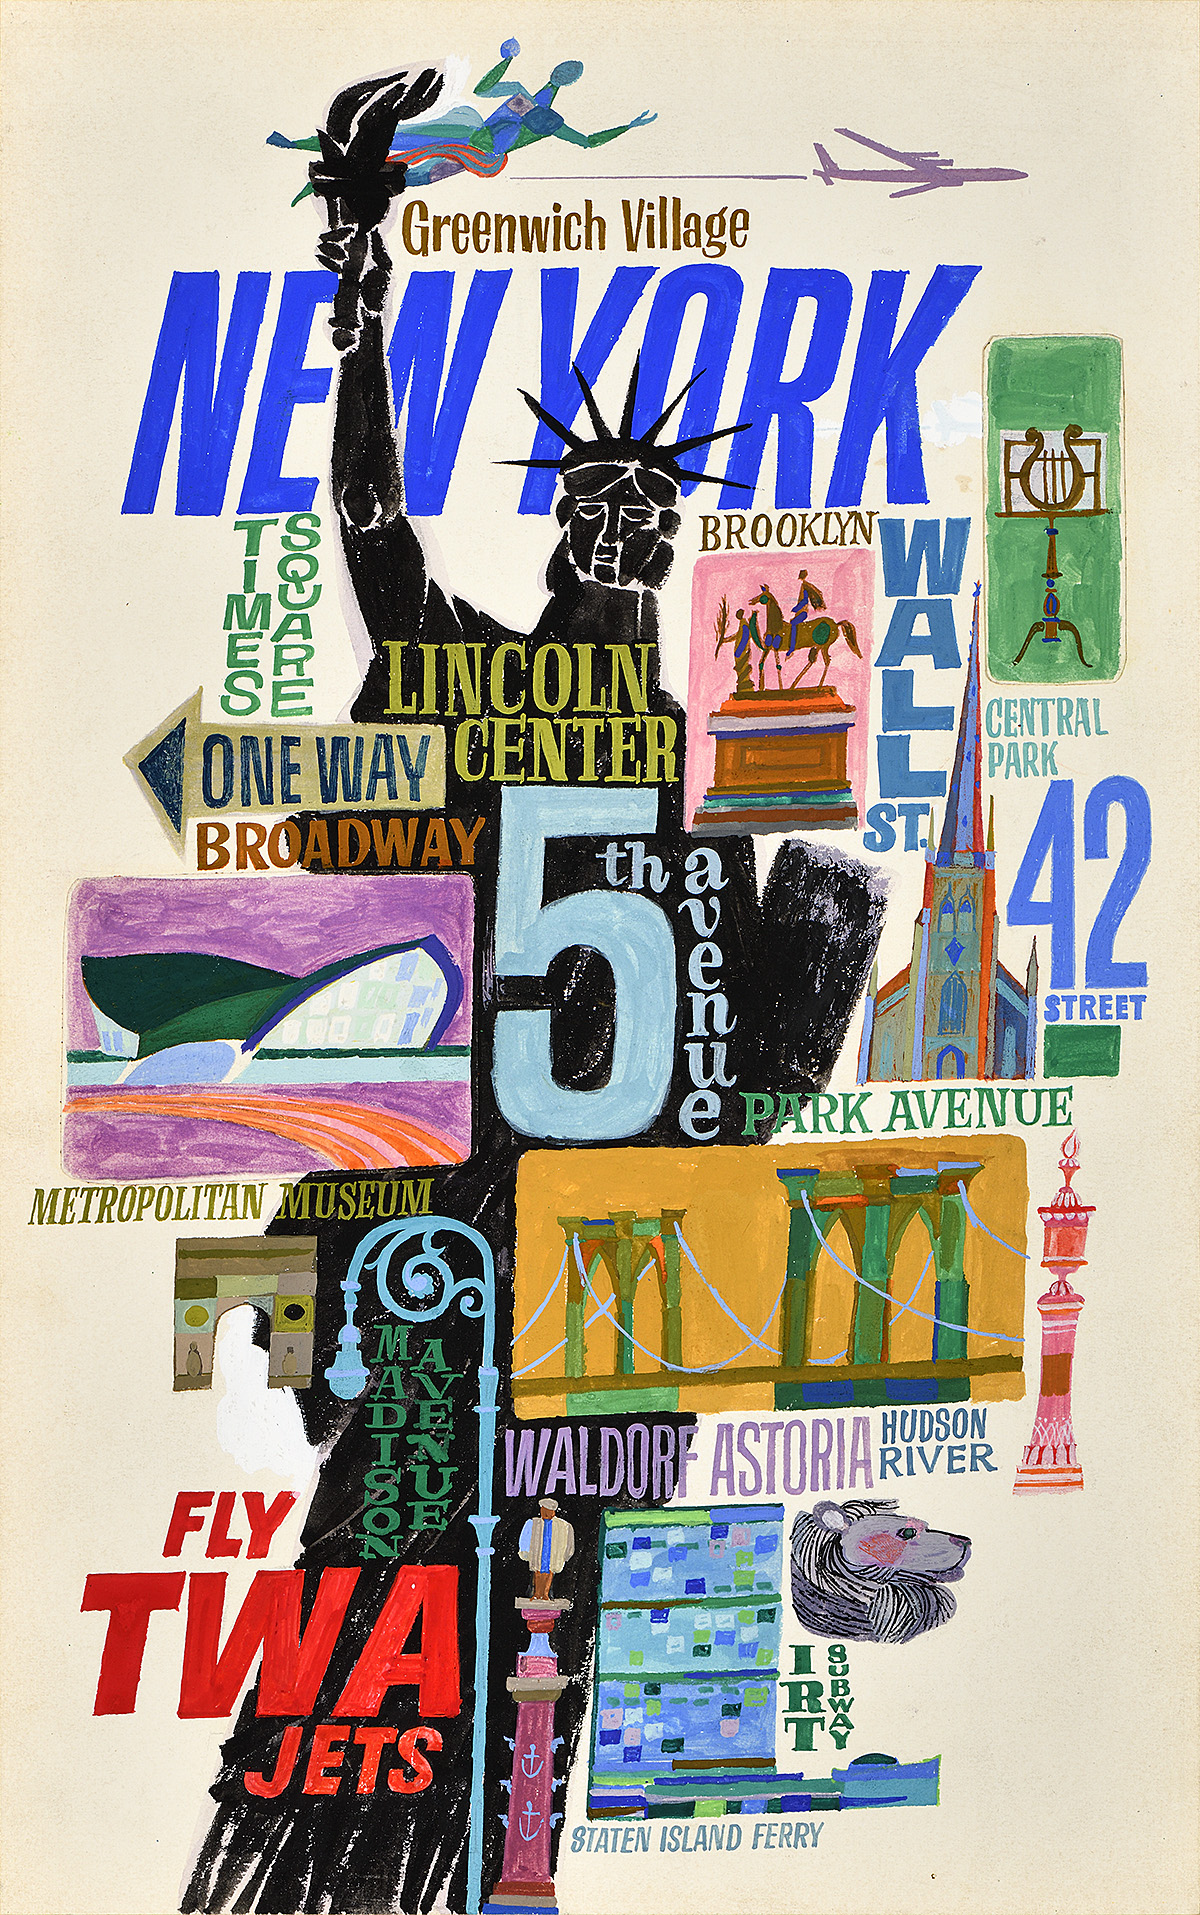 A painting-style poster made up of text and images of of various locations in Manhattan.